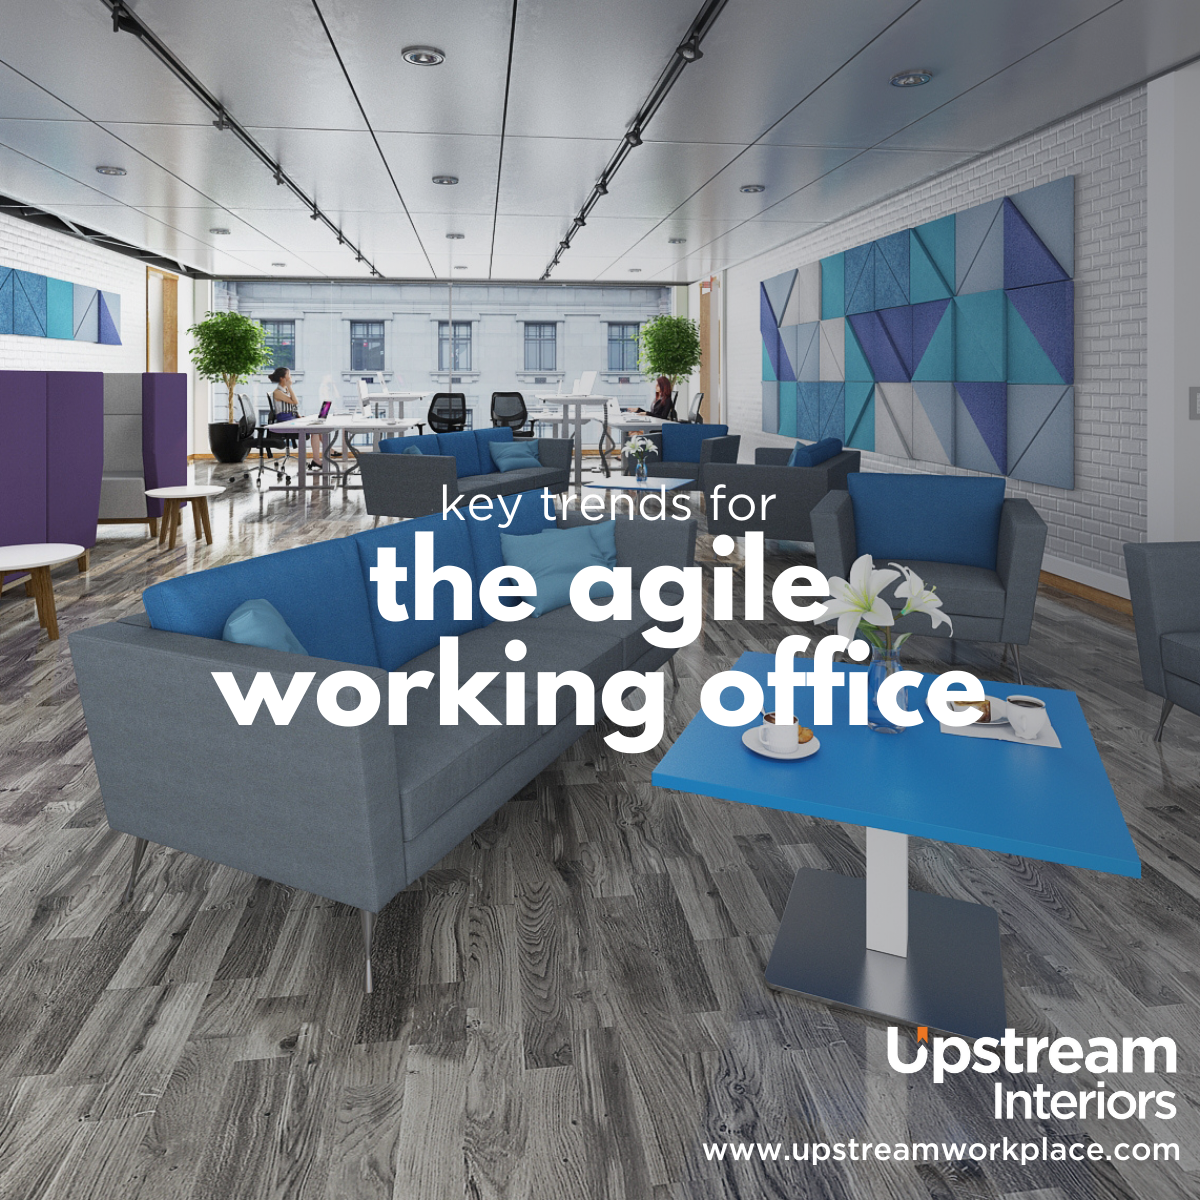 Key trends for the agile working office